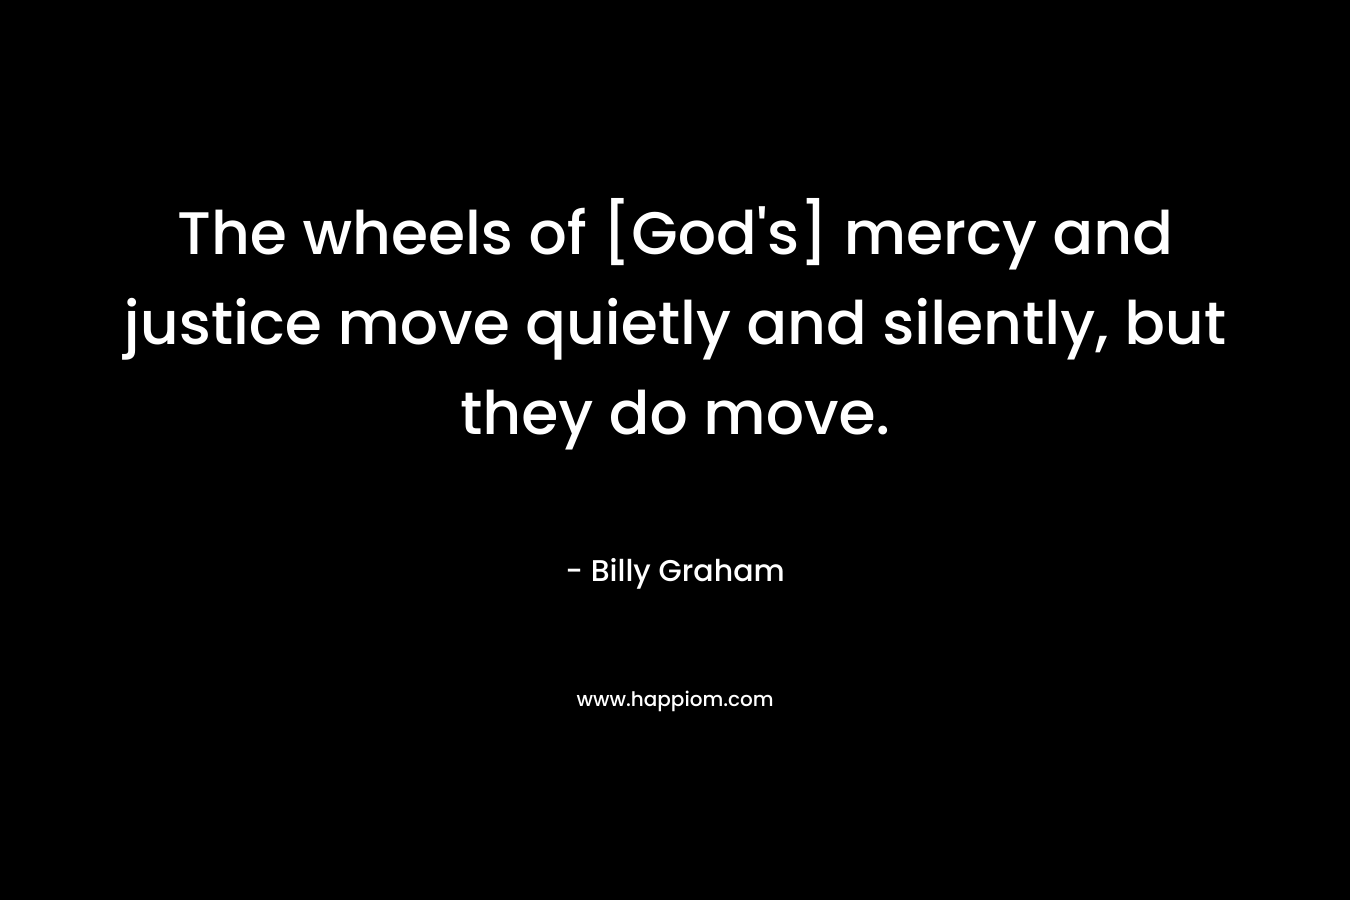 The wheels of [God's] mercy and justice move quietly and silently, but they do move.